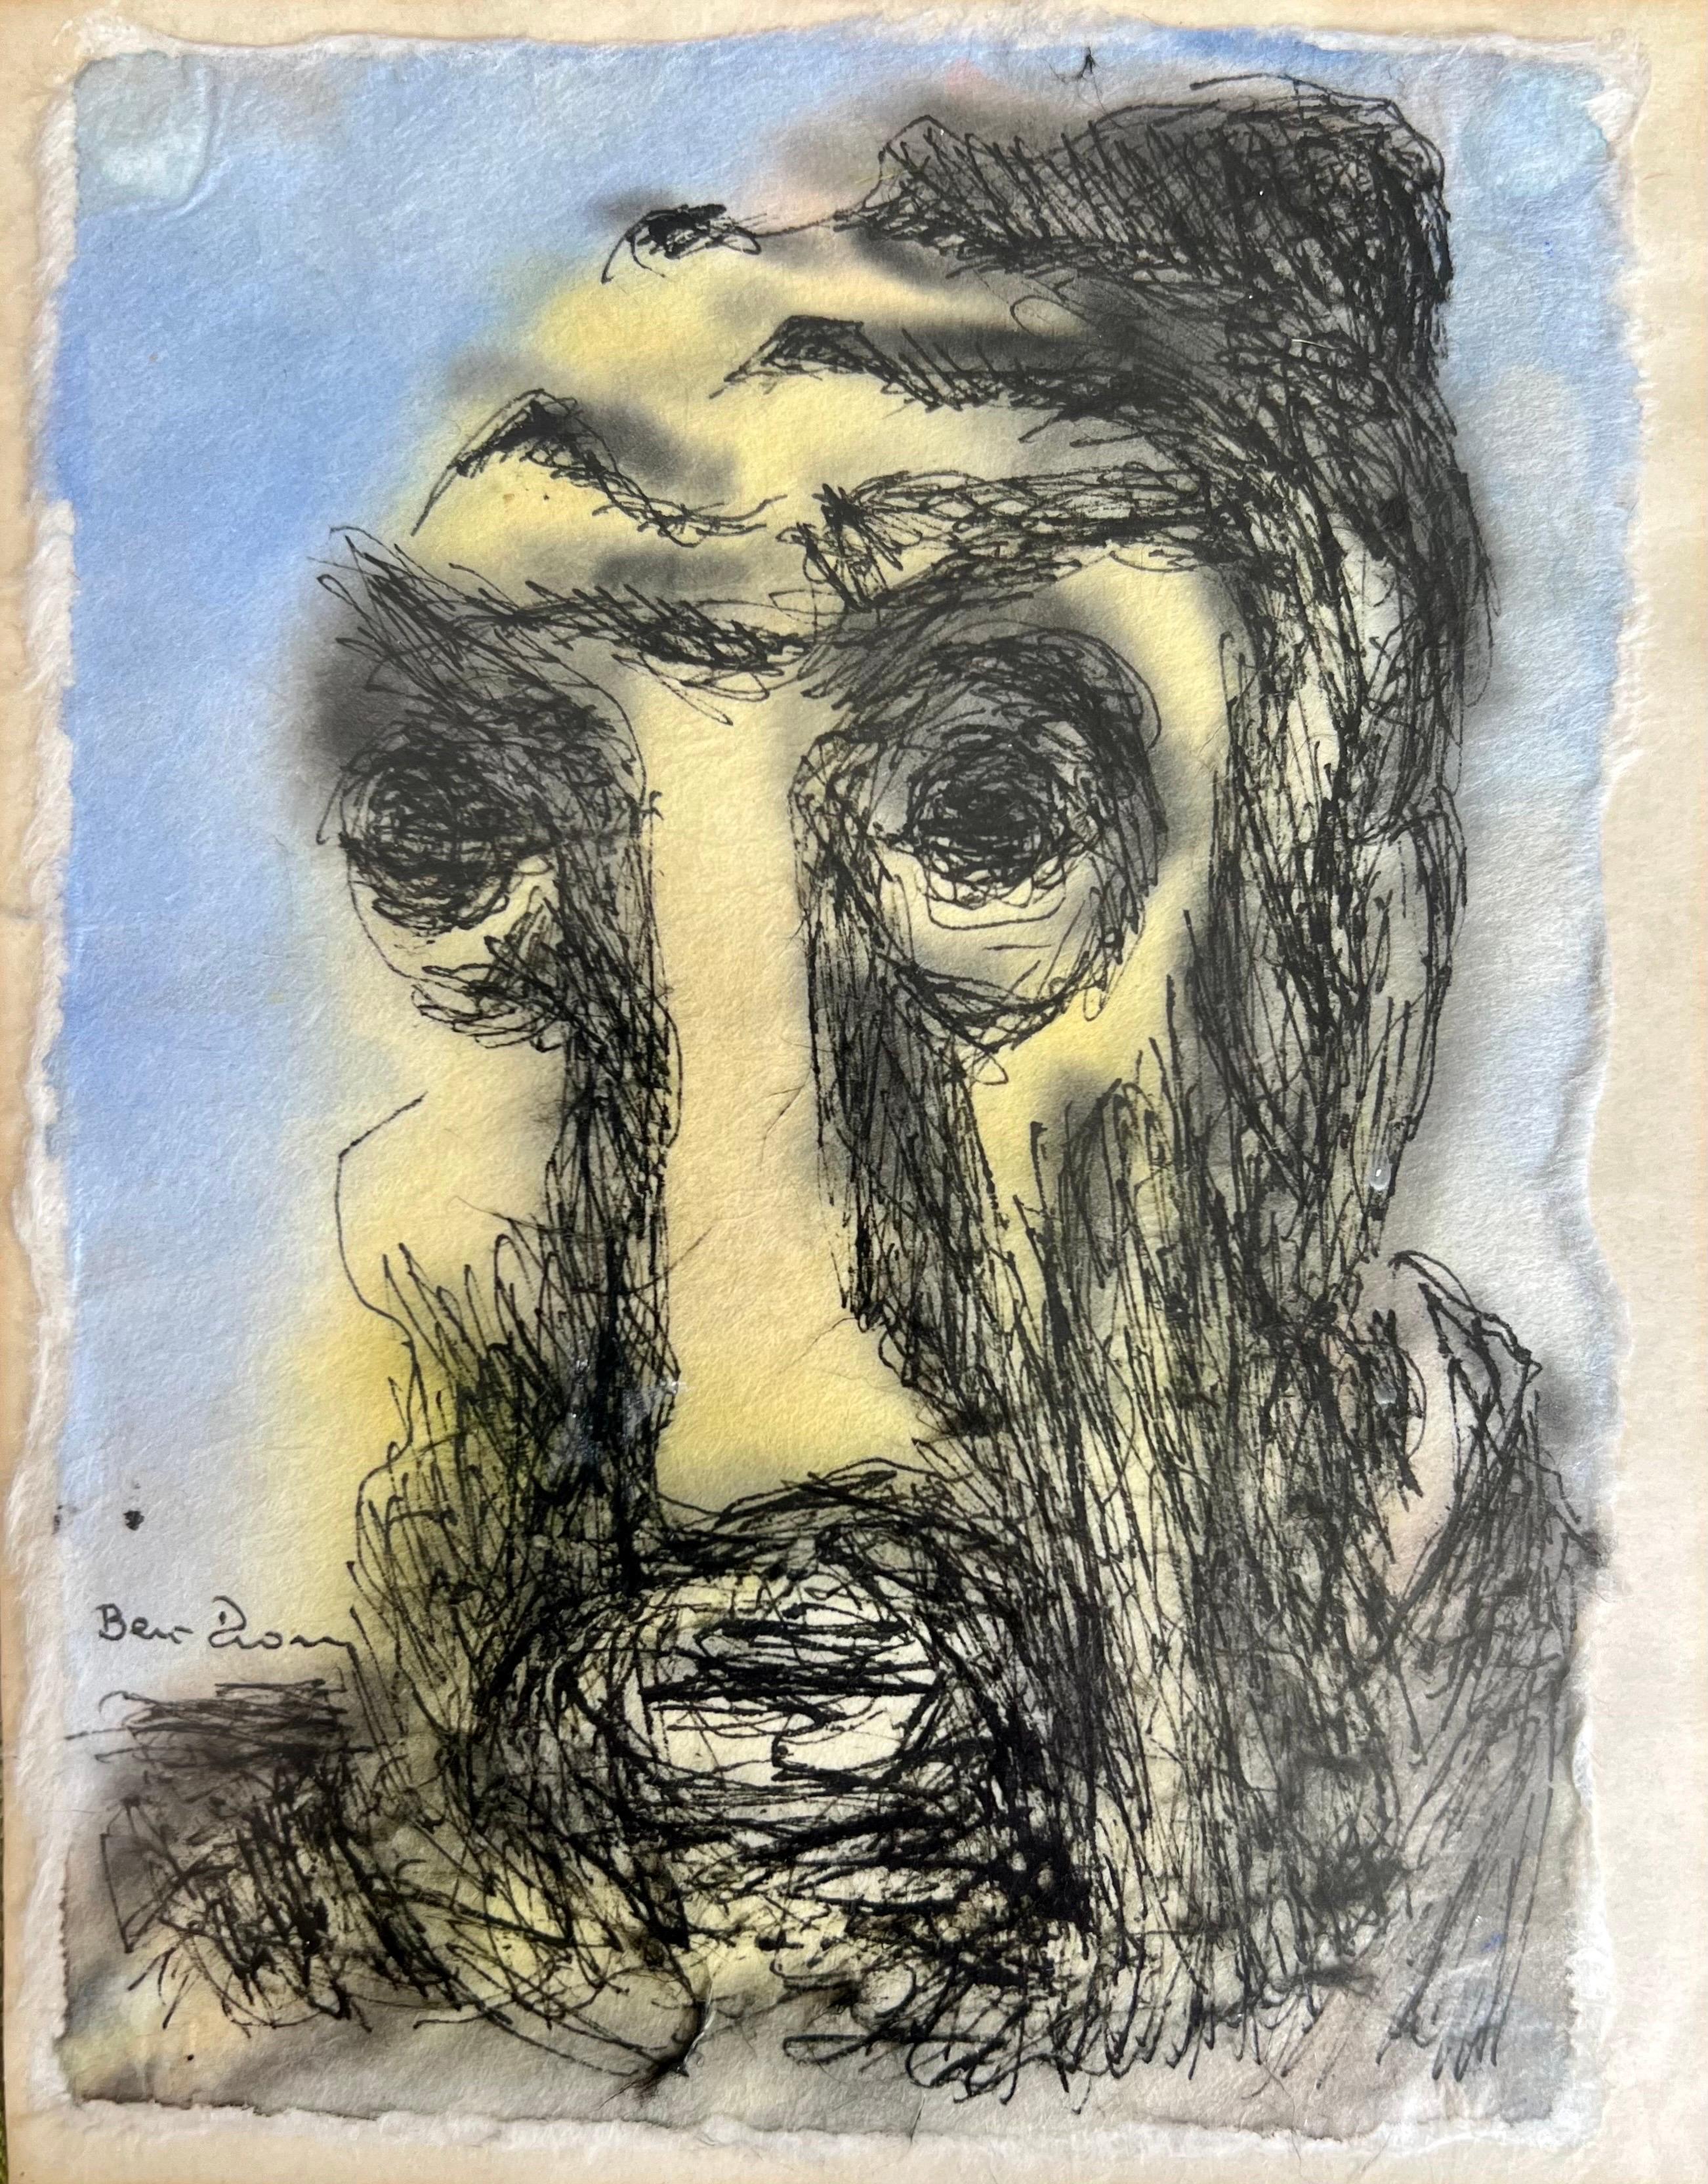 Frame measures 13.5 X 11.5
Paper measures 6.5 X 5 inches
Hand signed lower right
Watercolor painting of prophet or Rabbi, Judaica artwork

Born in 1897, Ben-Zion Weinman celebrated his European Jewish heritage in his visual works as a sculptor,